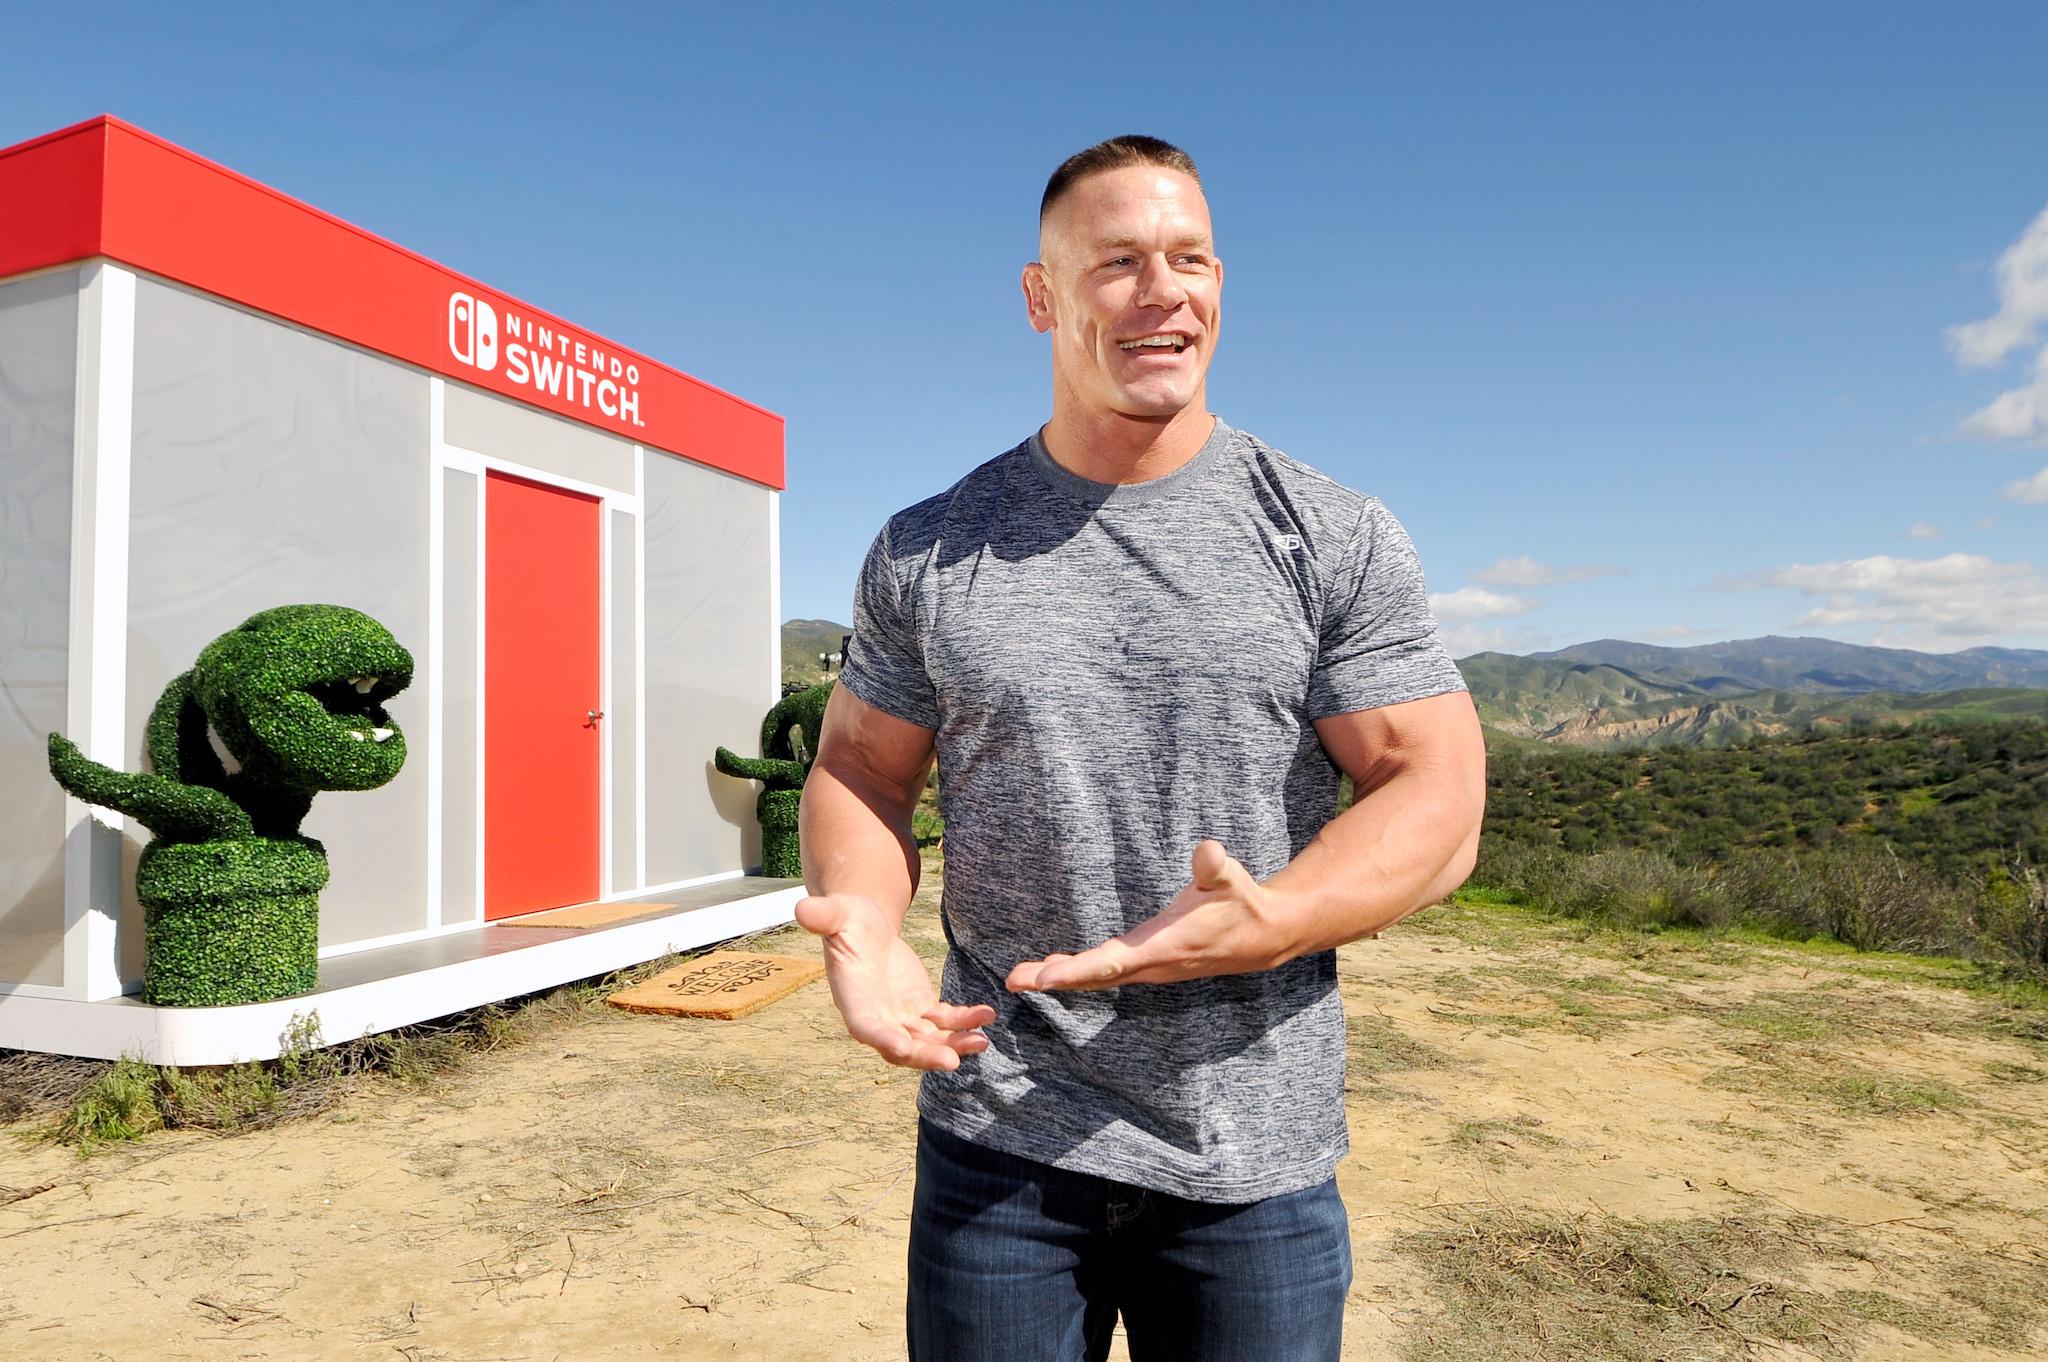 John Cena, WWE Superstar, hosts Nintendo Switch in Unexpected Places for the Nintendo Switch system on February 23, 2017